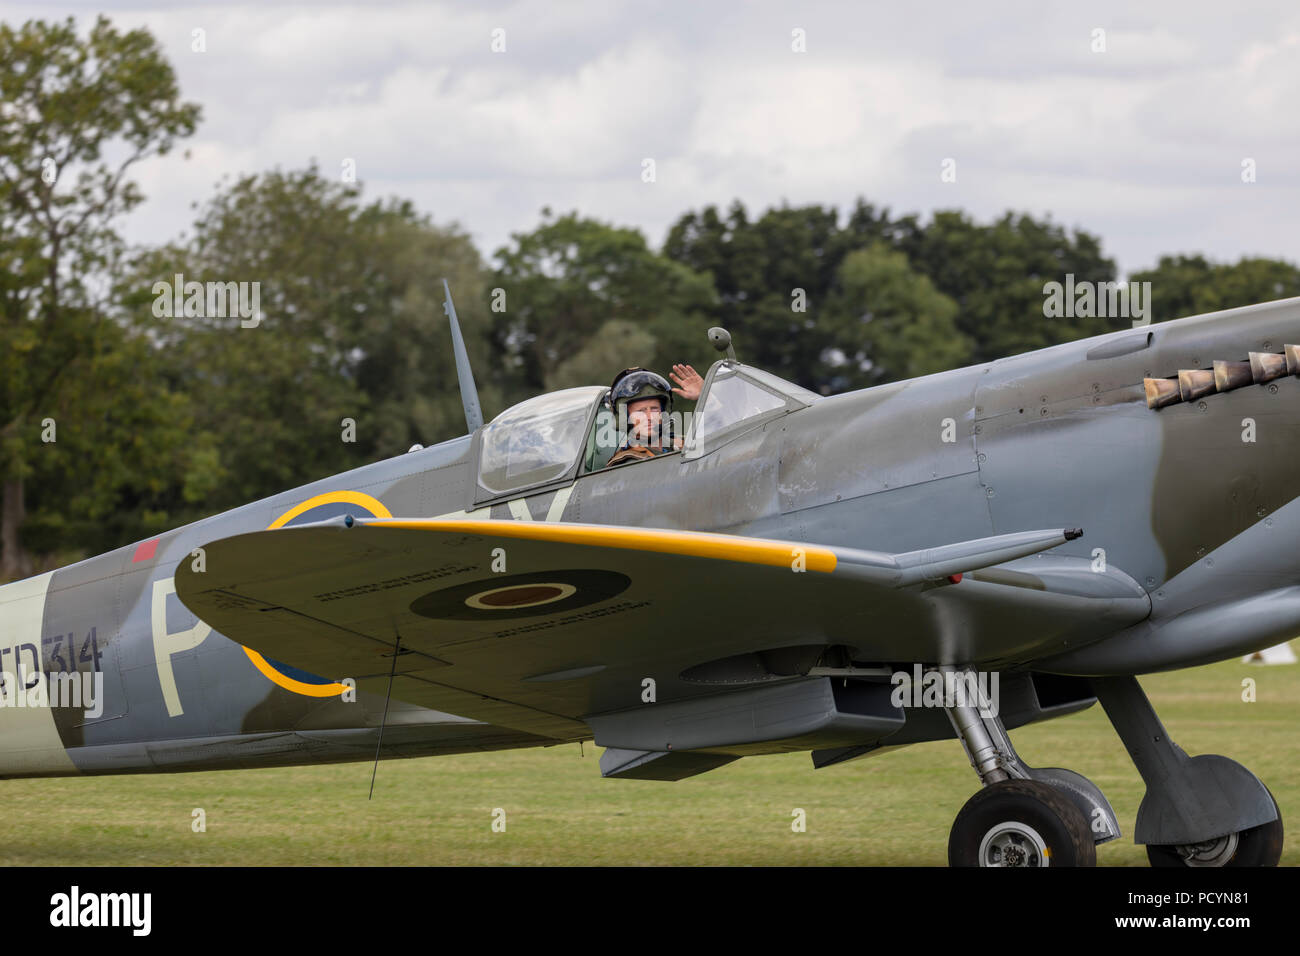 Side view of a historic RAF Spitfire aeroplane on the ground with the pilot waving Stock Photo